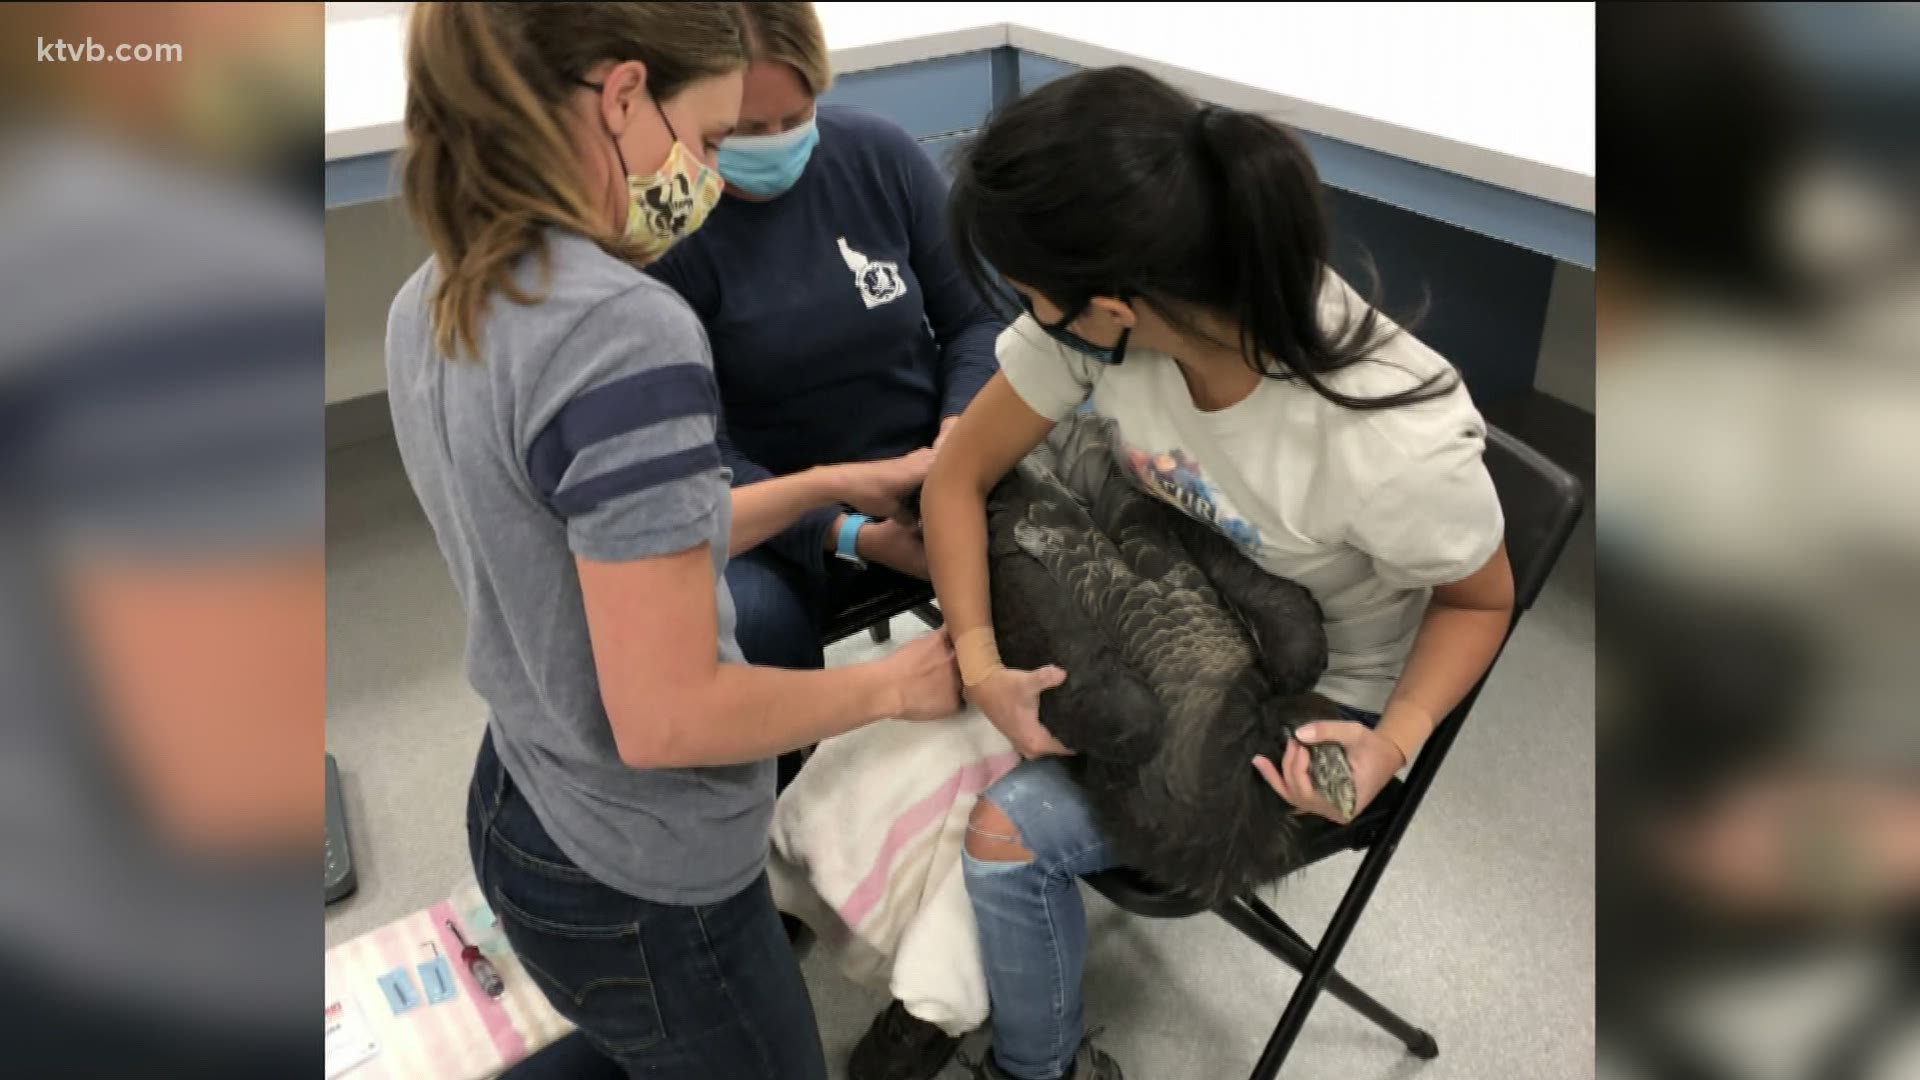 The Oregon Zoo had to relocate 44 condors from its breeding facility in Clackamas County after being placed under an evacuation order due to wildfires.